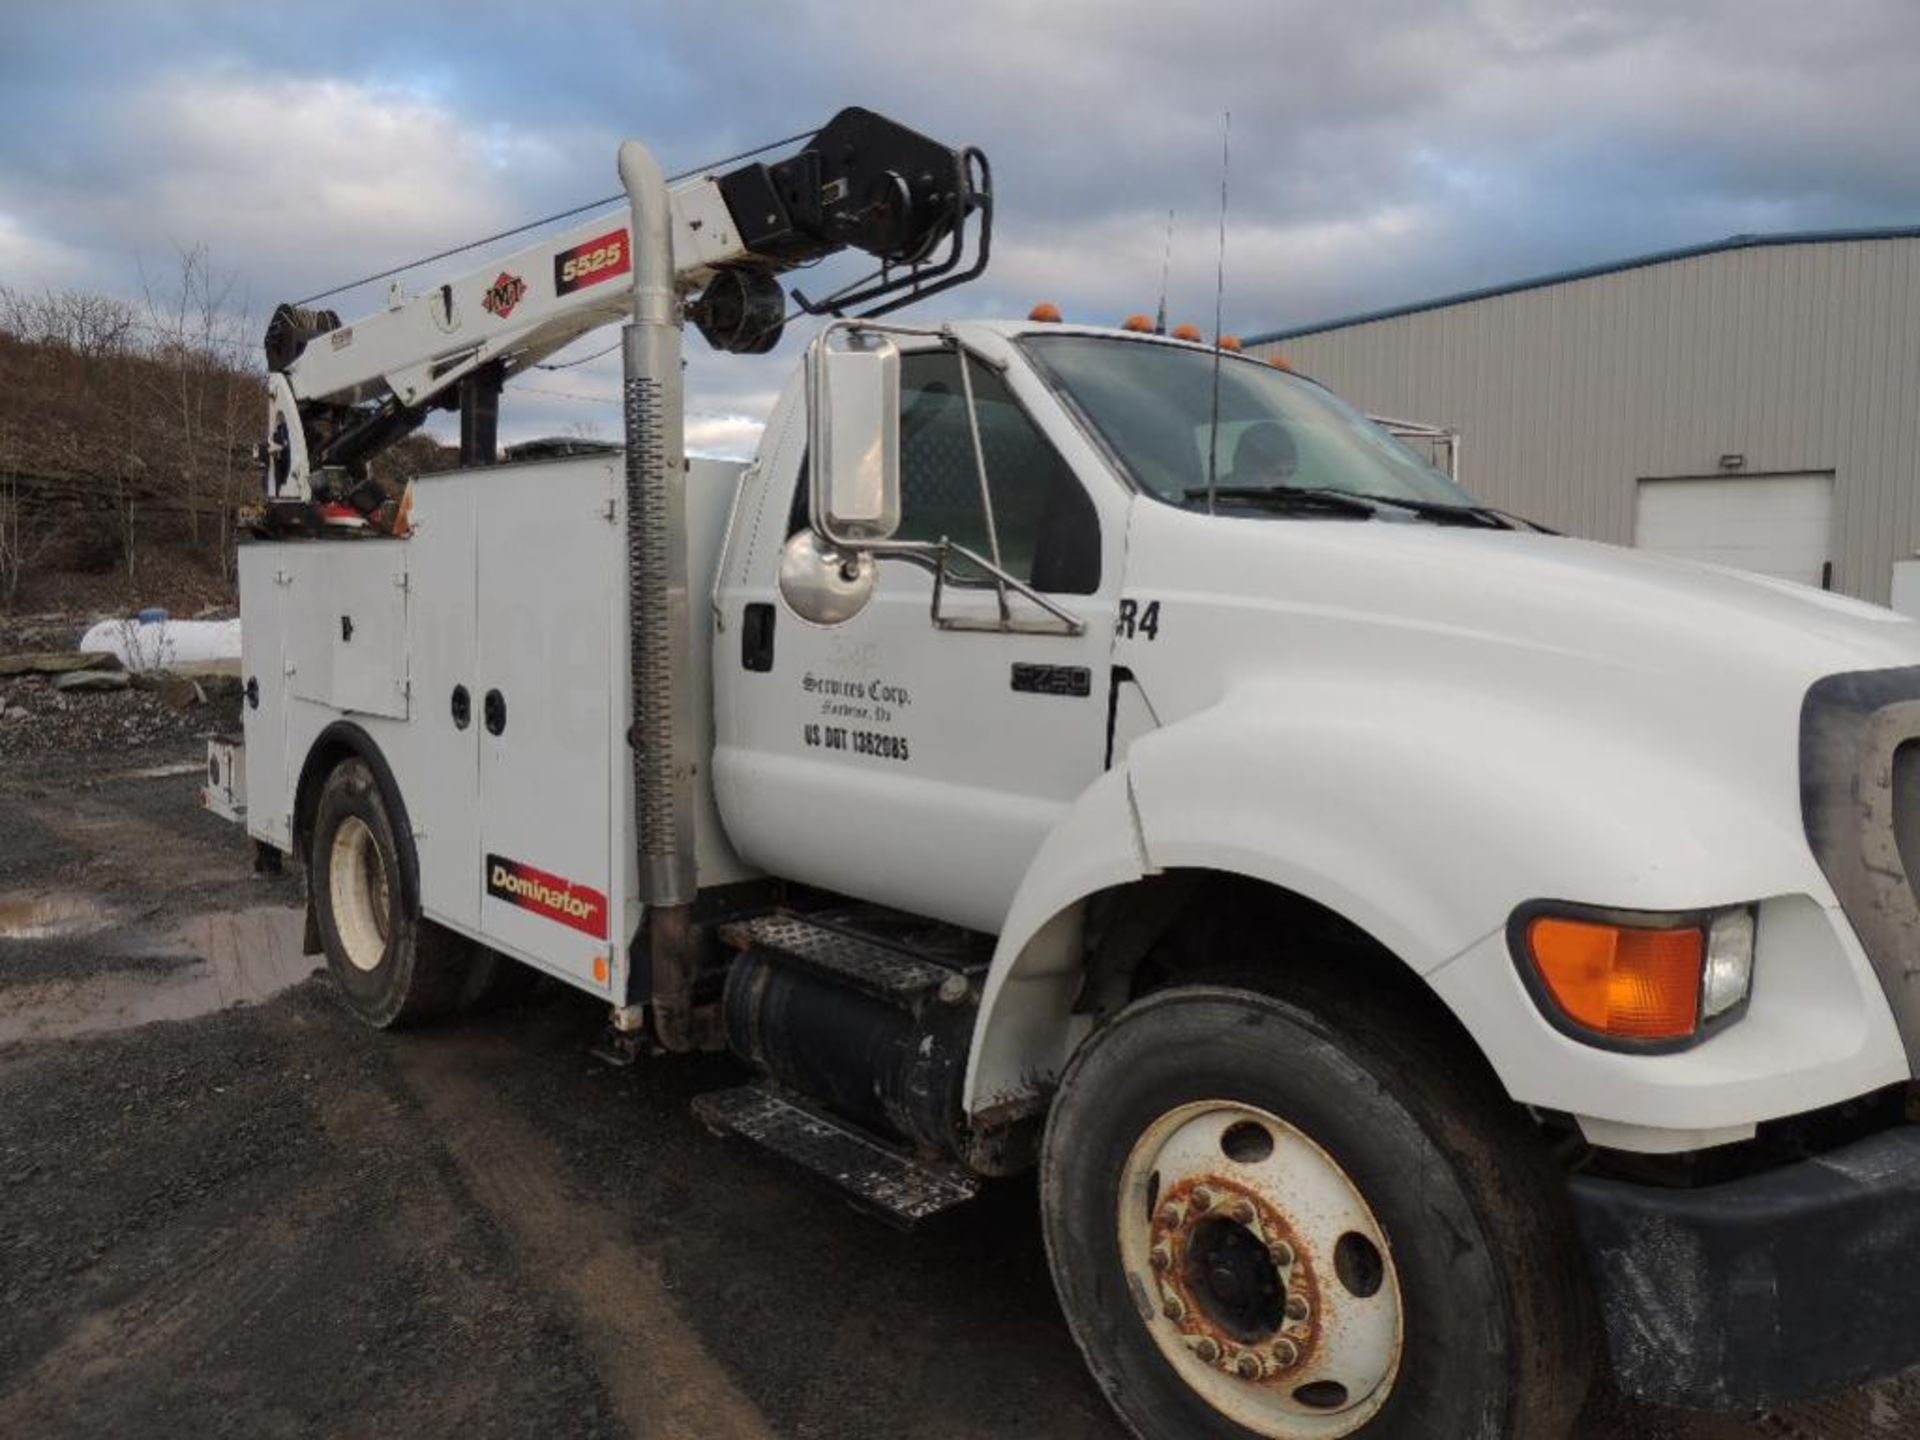 Ford F750 Service Truck, 154,935 Miles, Vin. 3FRWG7546V356749 - Image 4 of 7